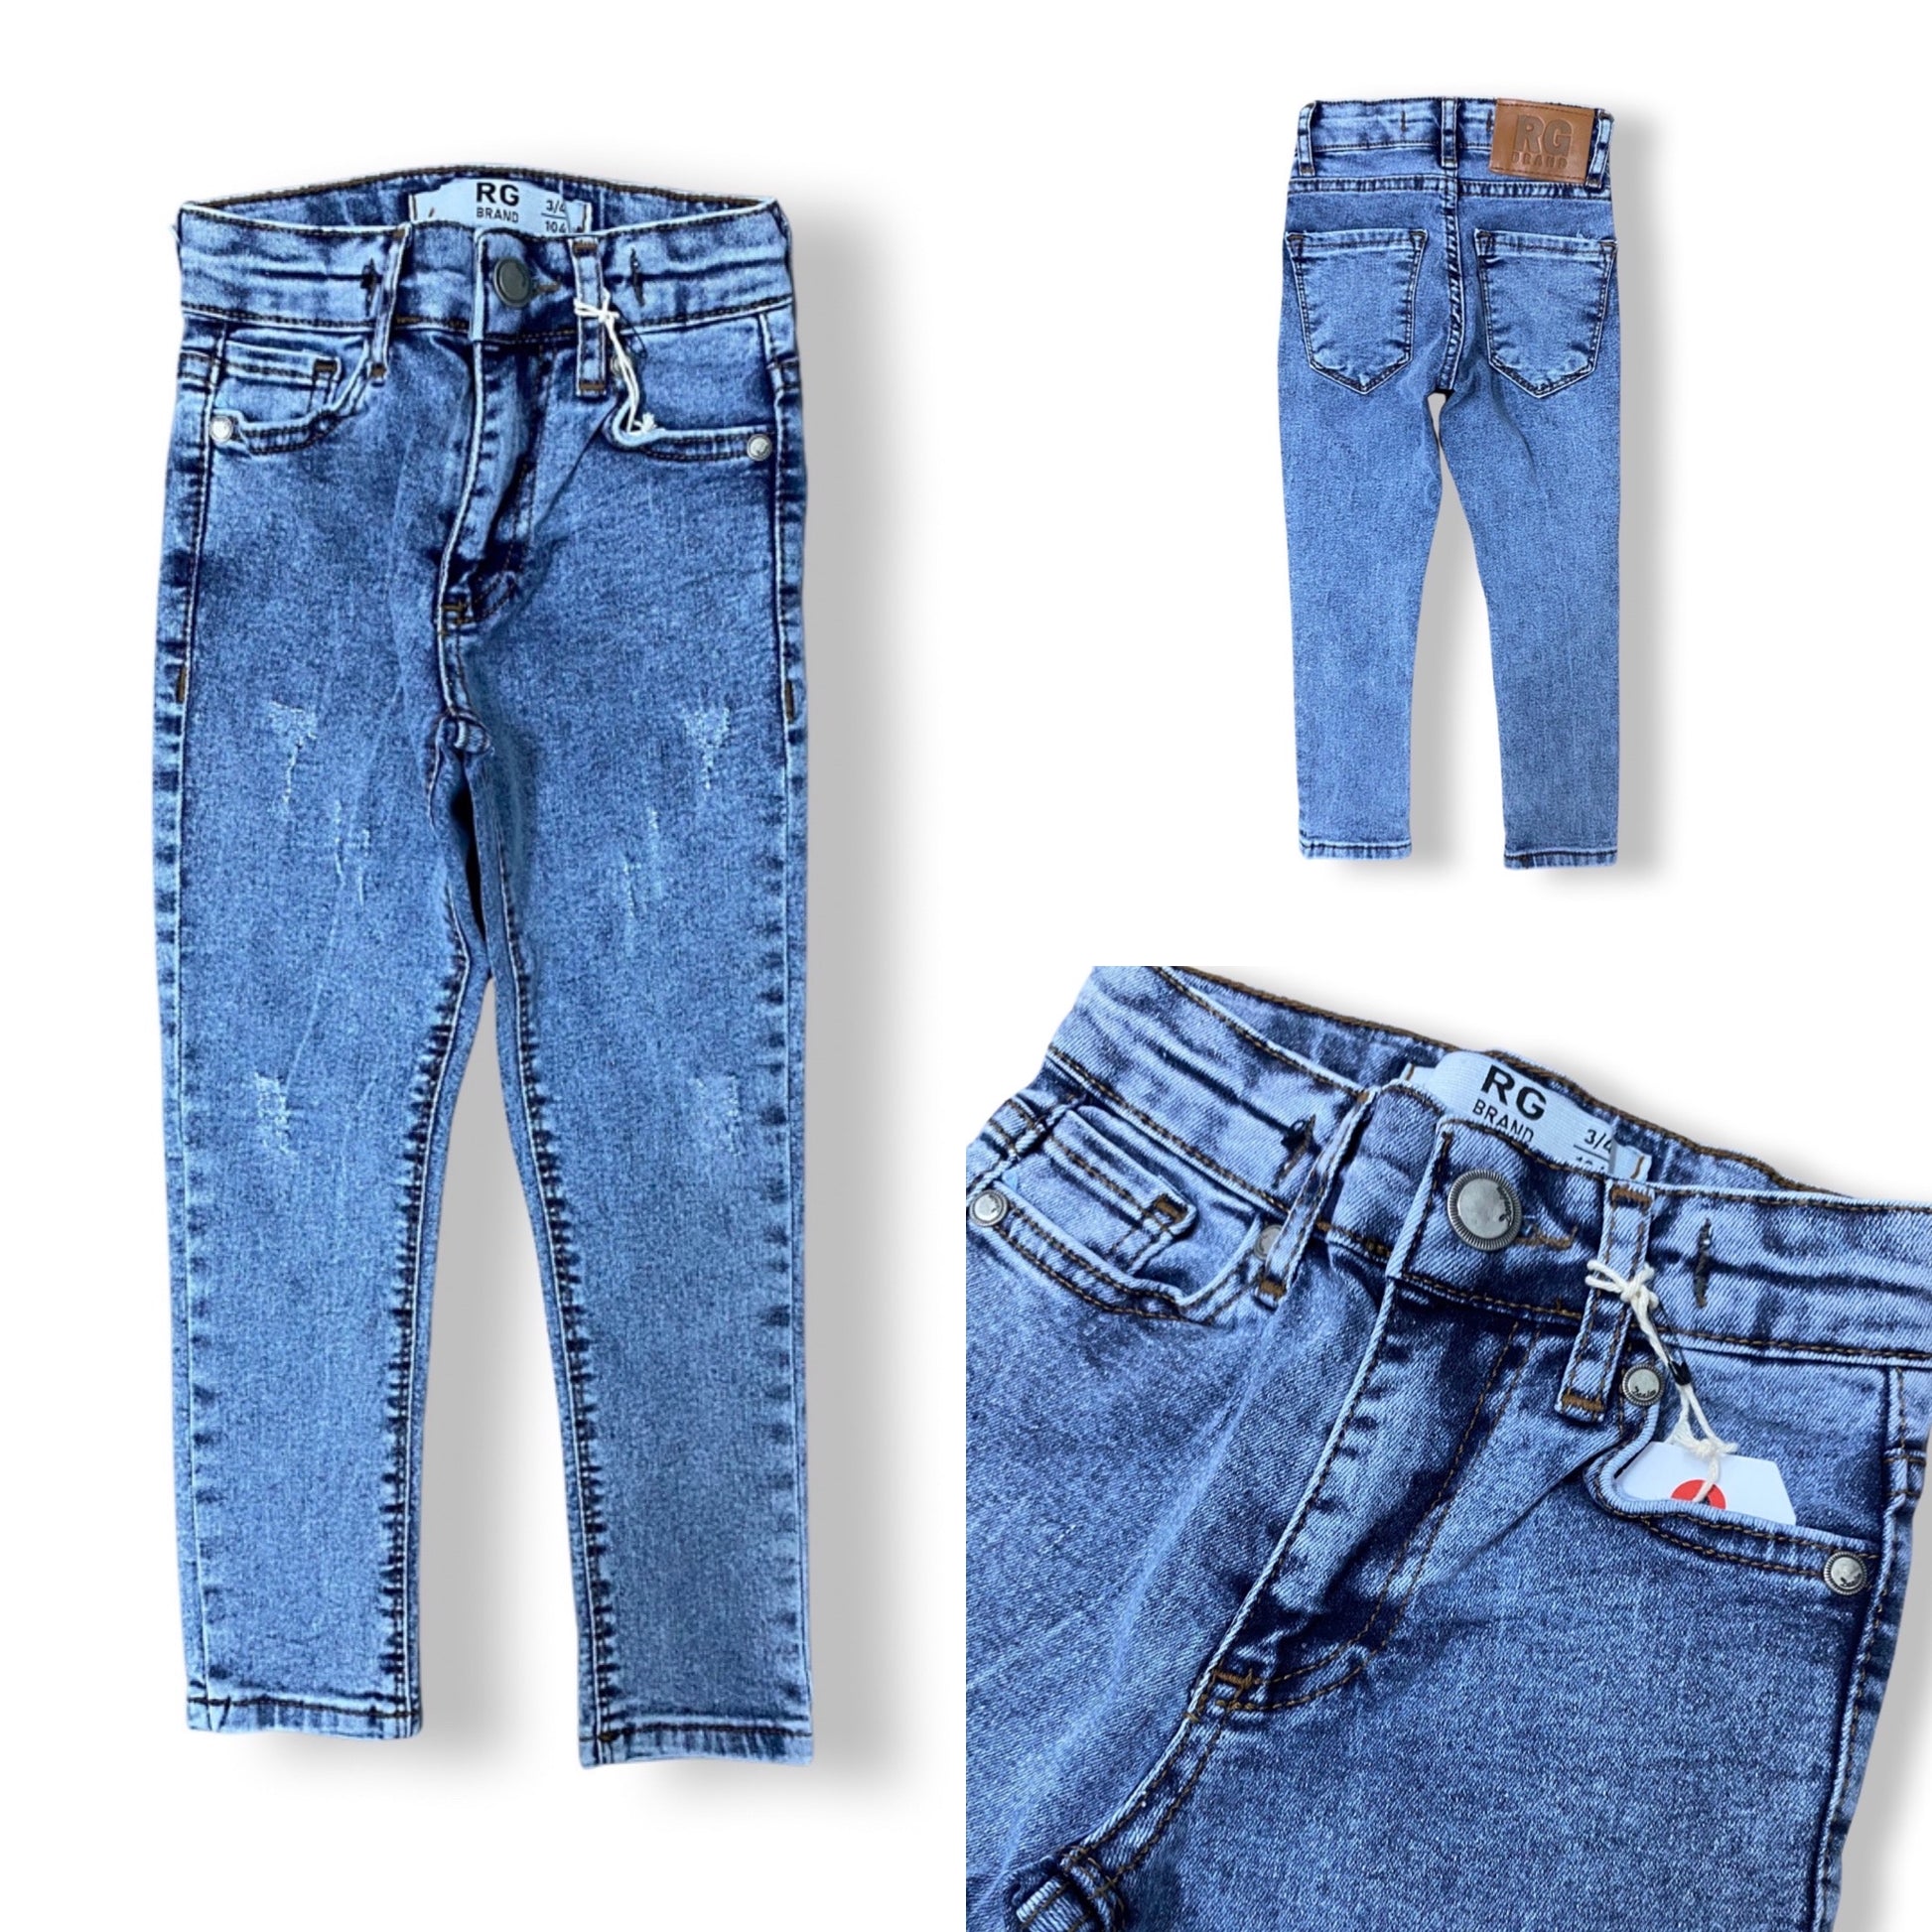 R.G. Jeans Dark Blue Kids Plain Faded Jeans at Rs 150/piece in